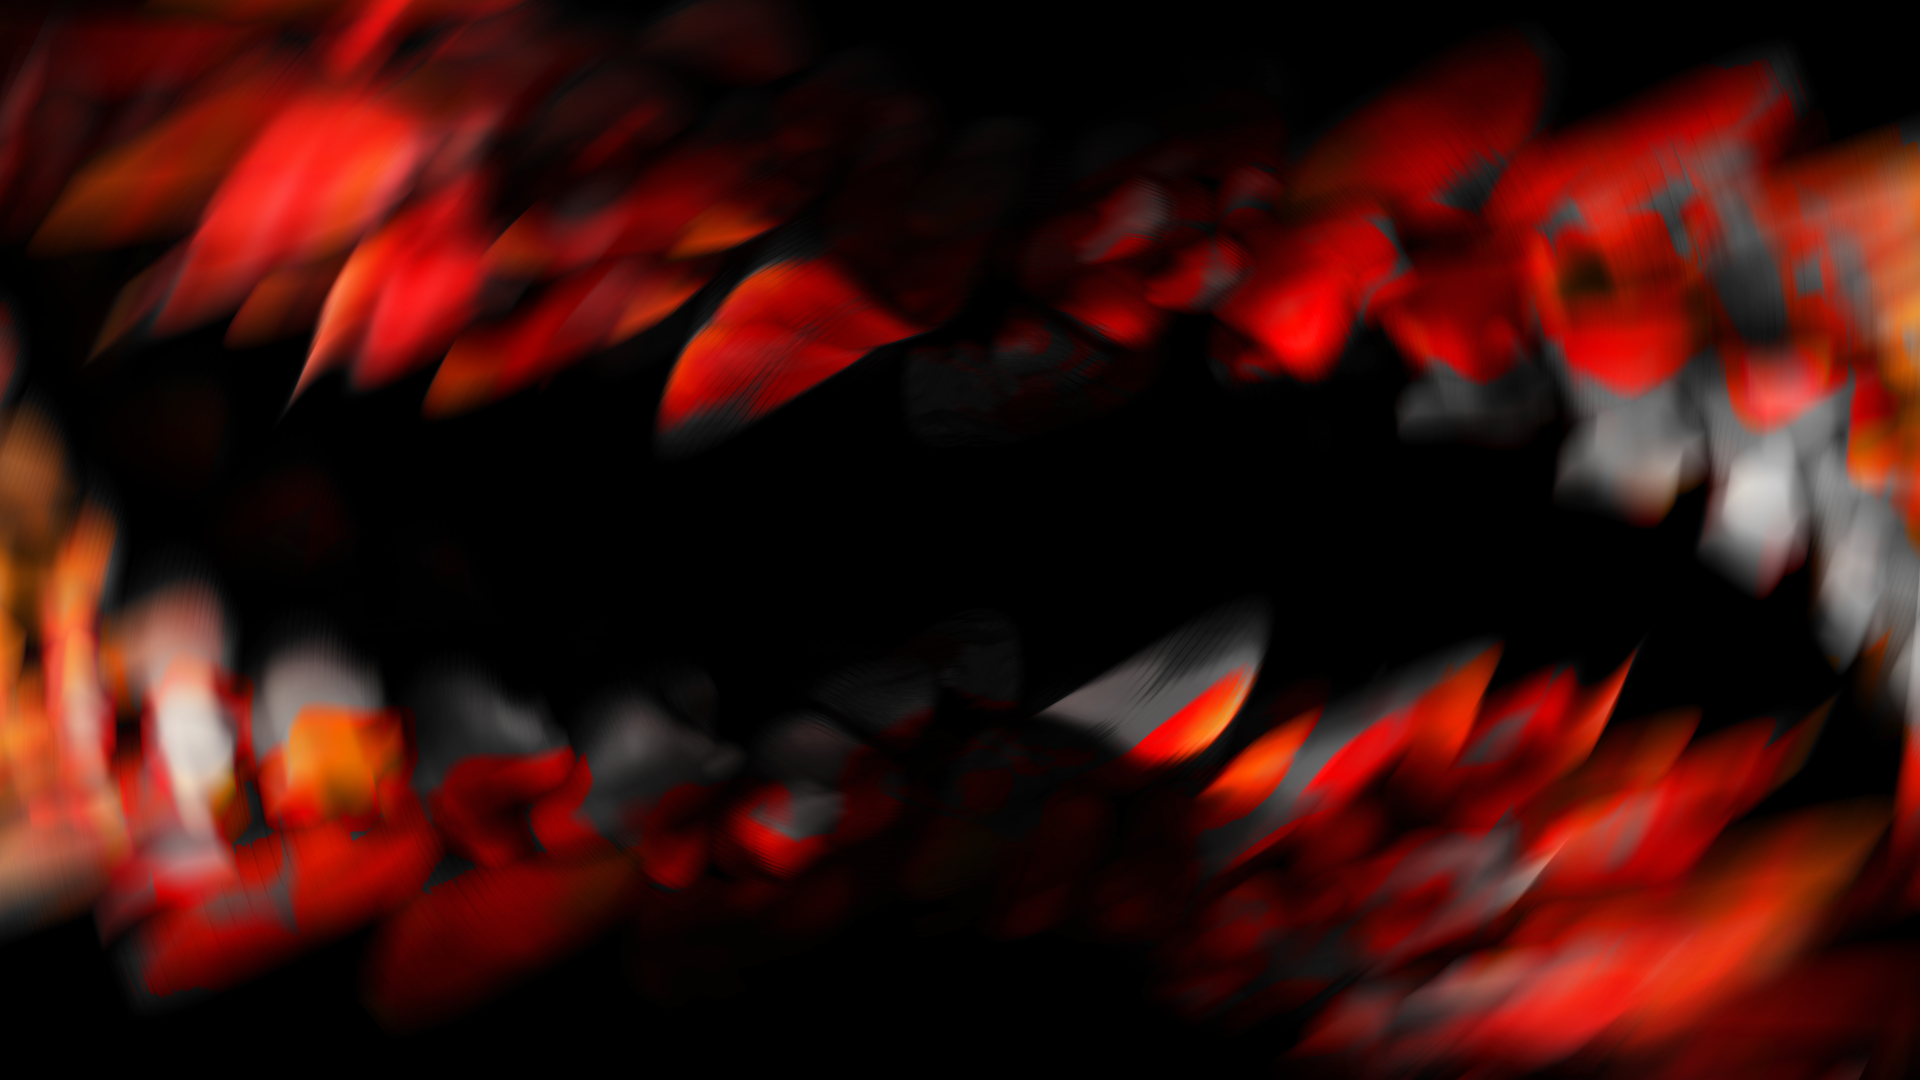 inferno.png